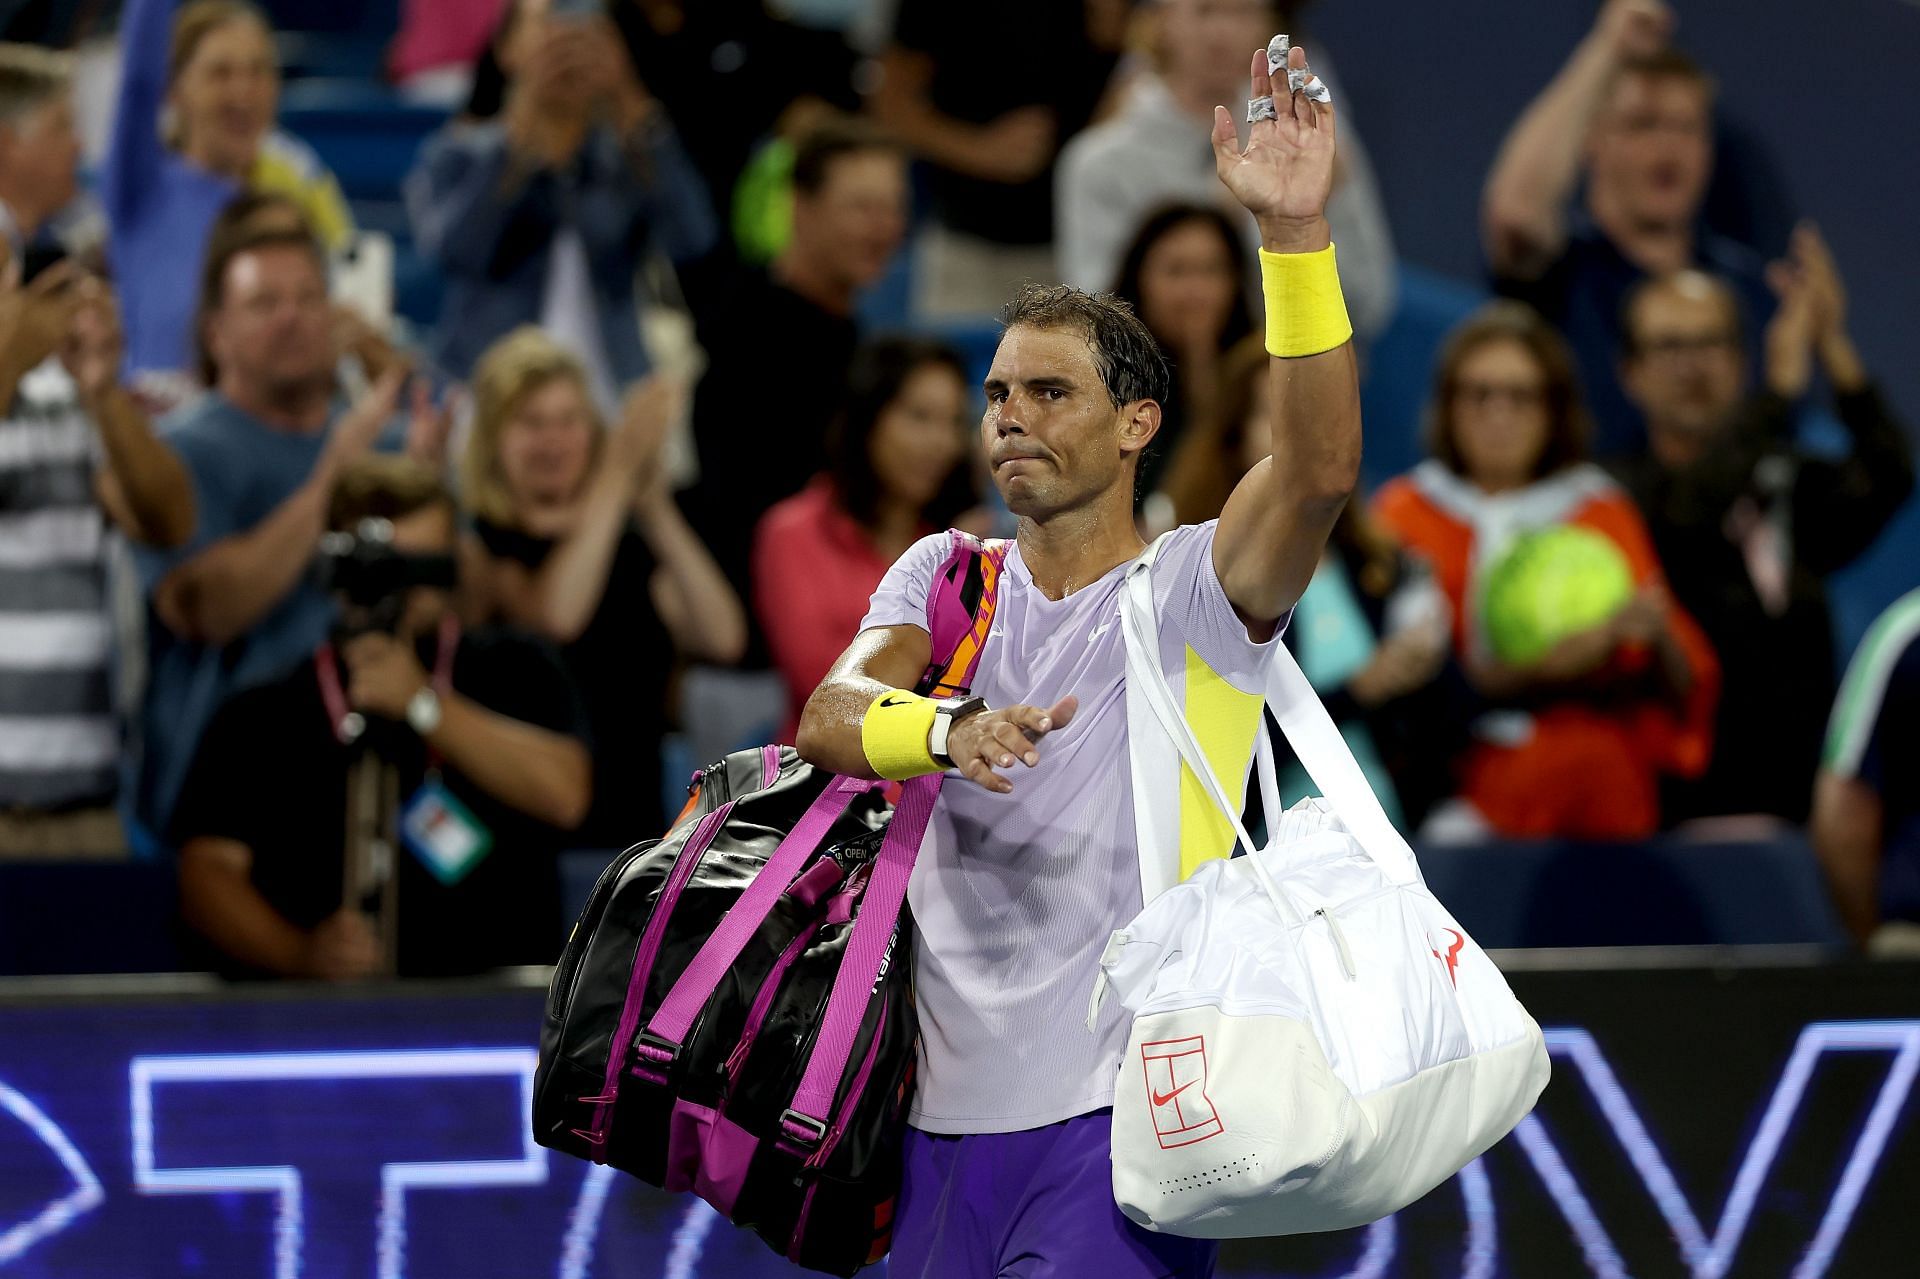 Rafael Nadal is a four-time US Open champion.